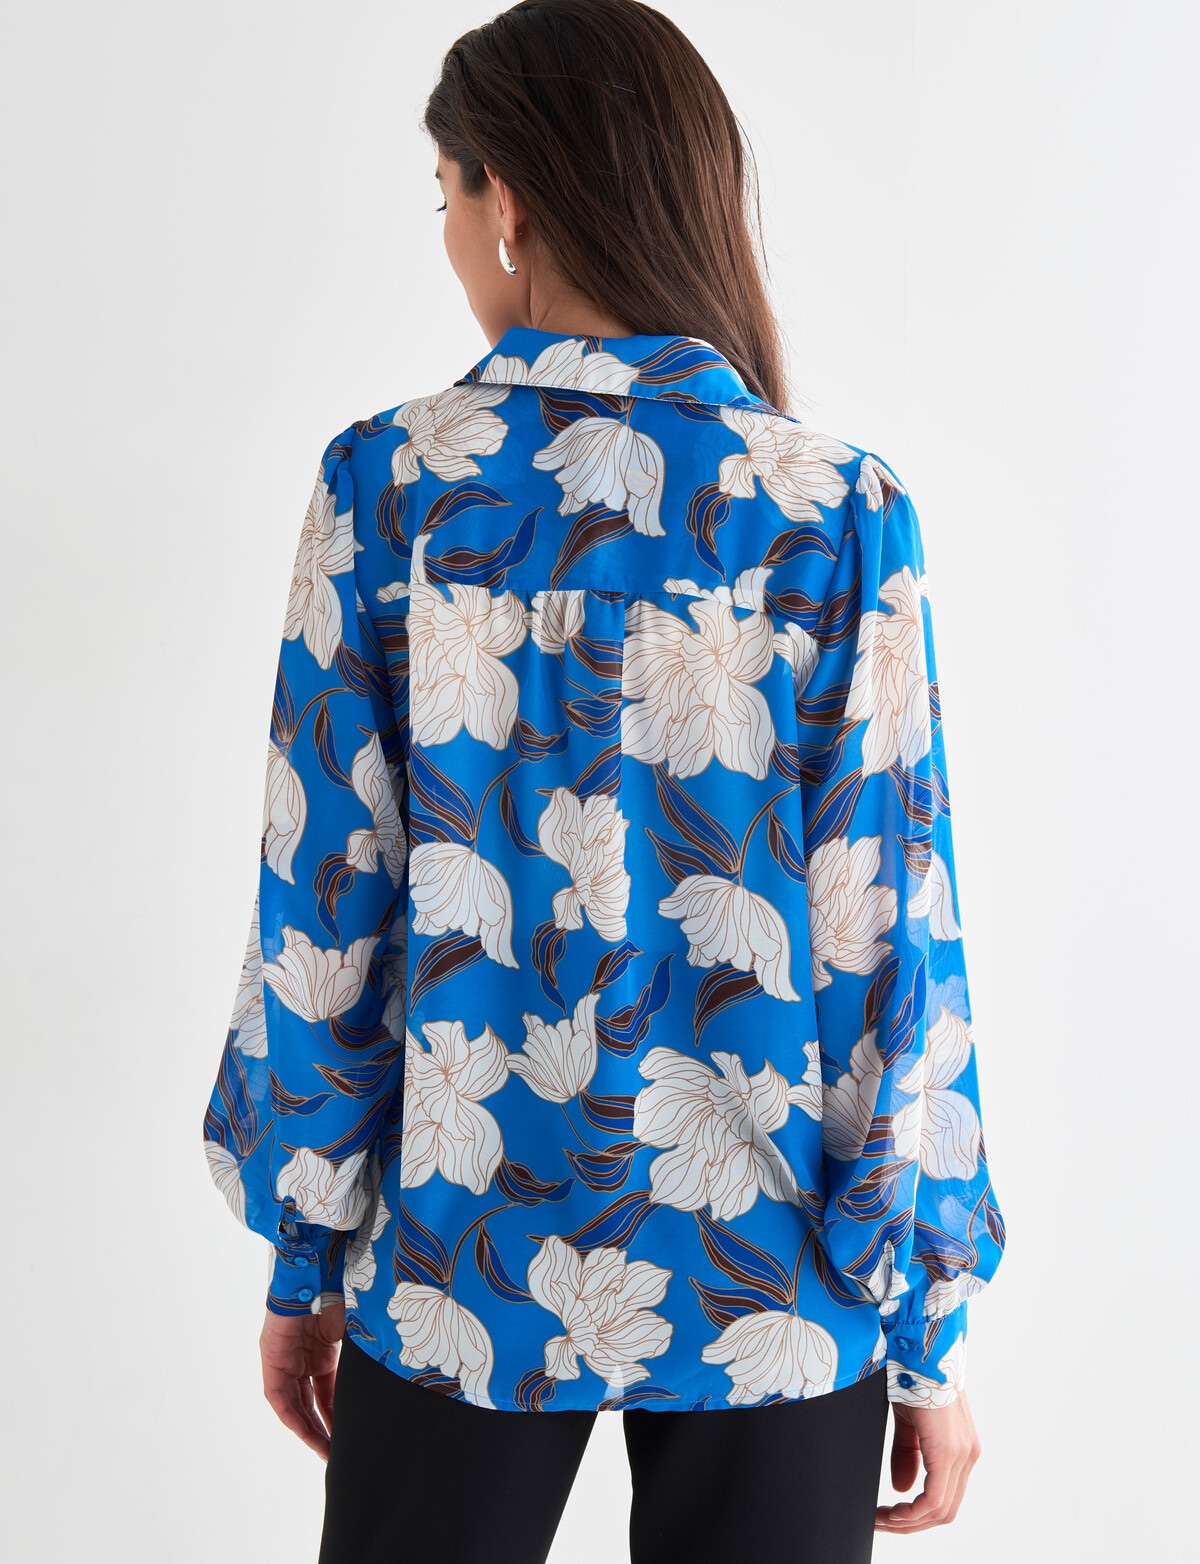 Whistle Vibrant Floral Long Sleeve Fashion Blouse, Blue - Tops